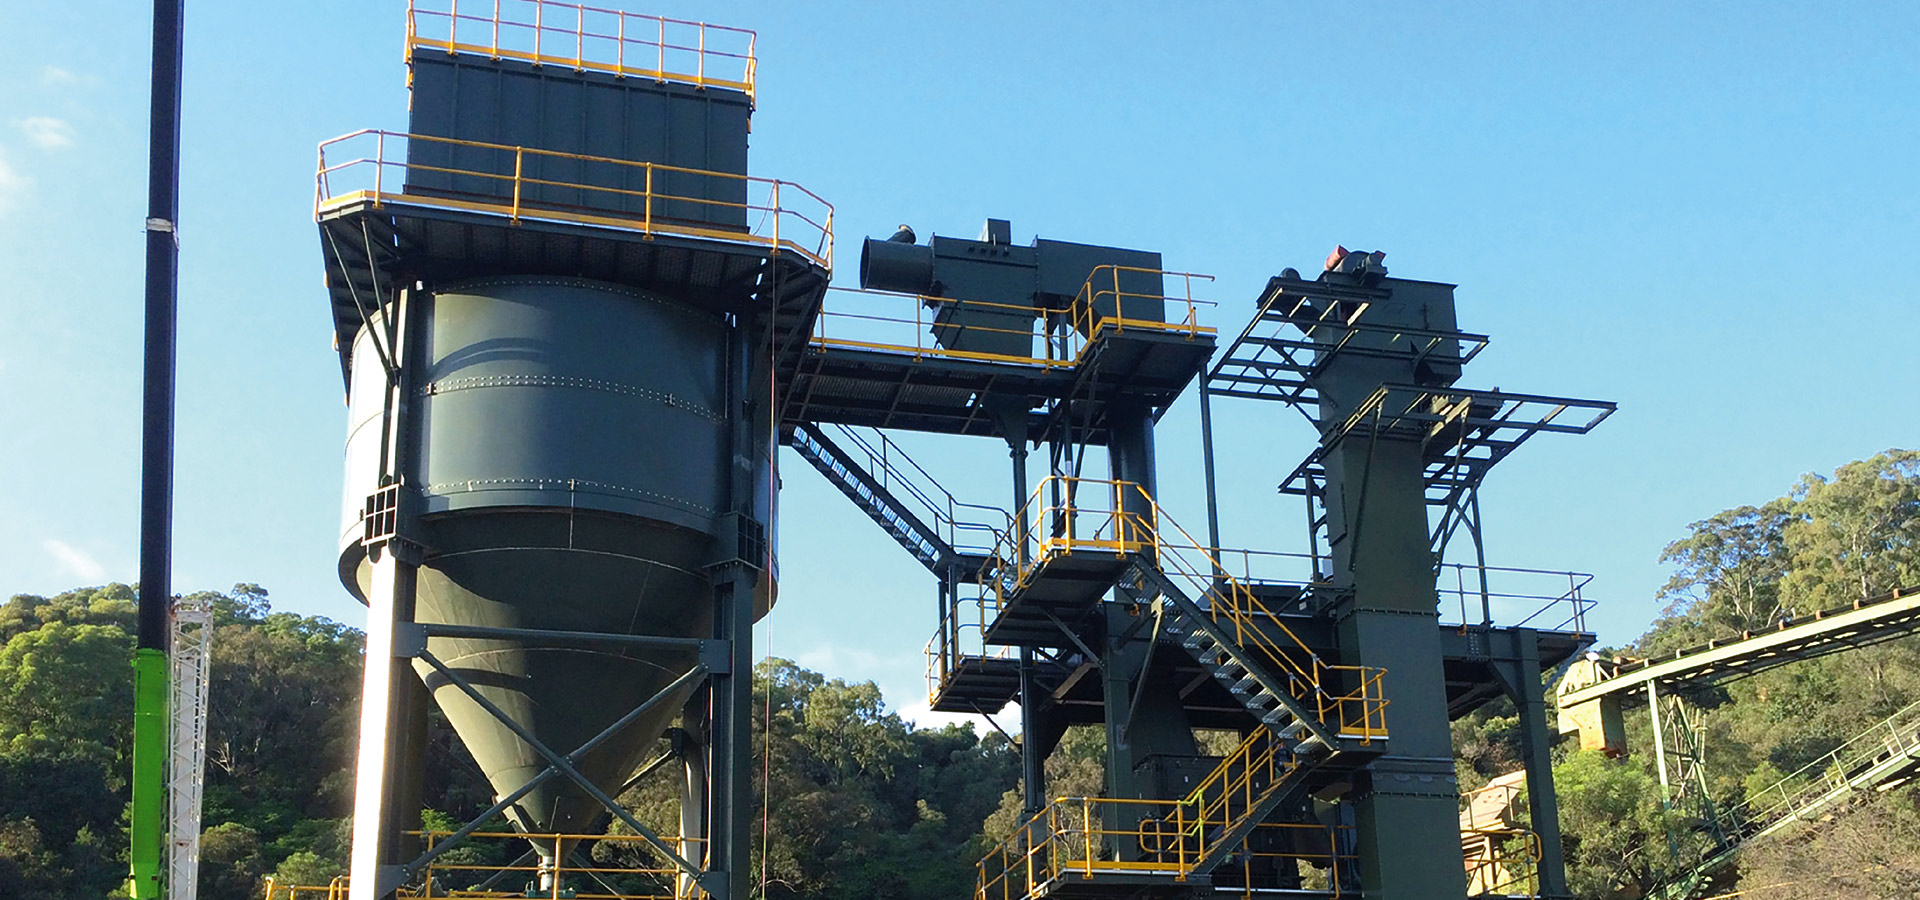 How to Improve Cleanliness: Effective Dust Control Measures for Cement Bucket Elevators